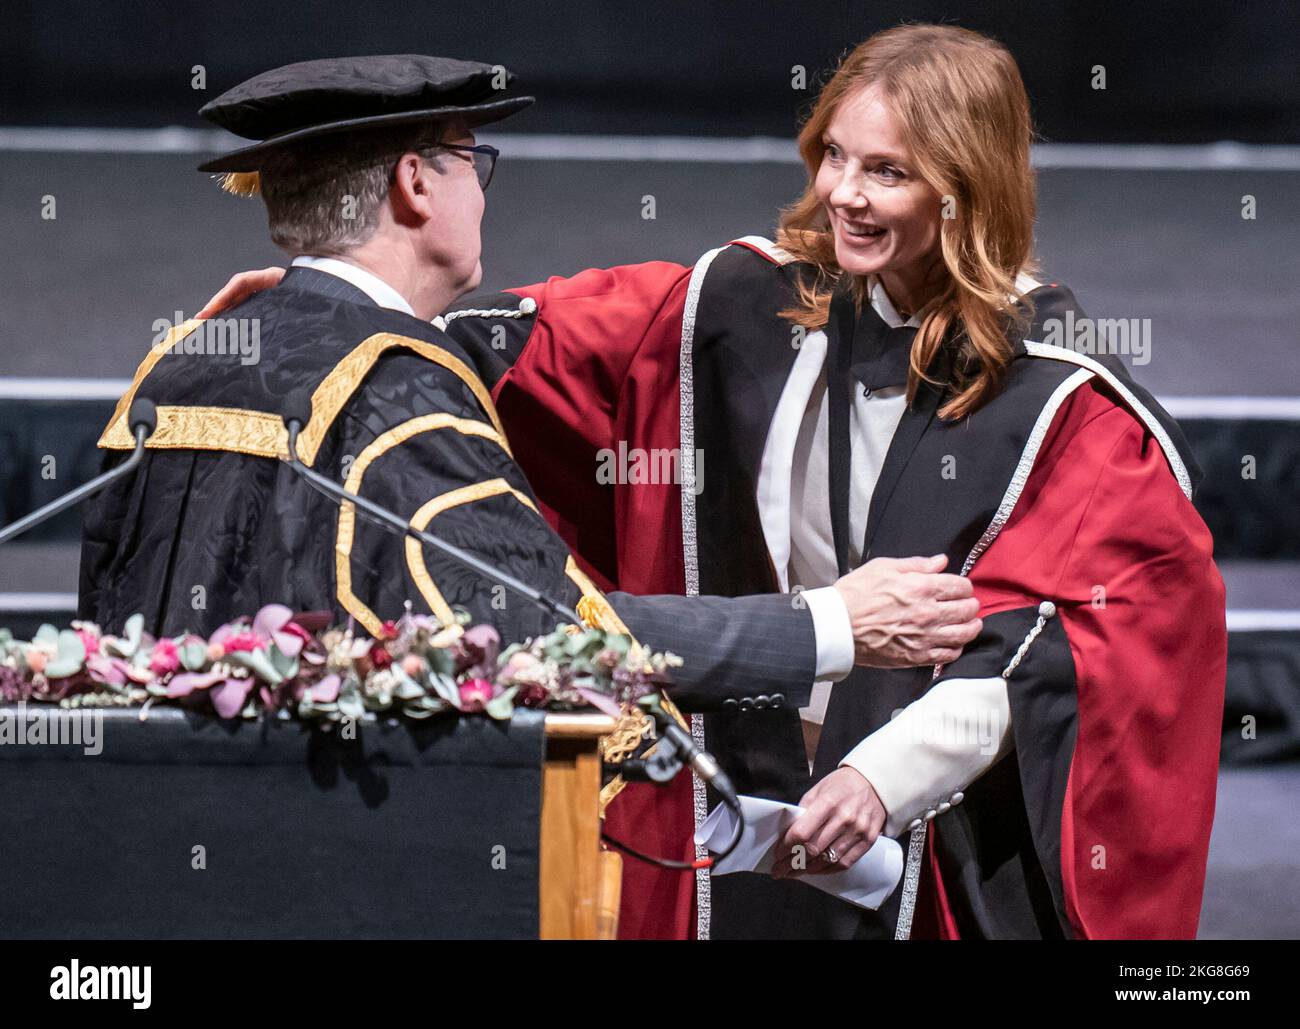 Vice Chancellor of Sheffield Hallam University Chris Husbands (left) congratulates Geri Halliwell-Horner (right) after she received an honorary doctorate from Sheffield Hallam University at Ponds Forge International Sports Centre in Sheffield. Picture date: Tuesday November 22, 2022. Stock Photo